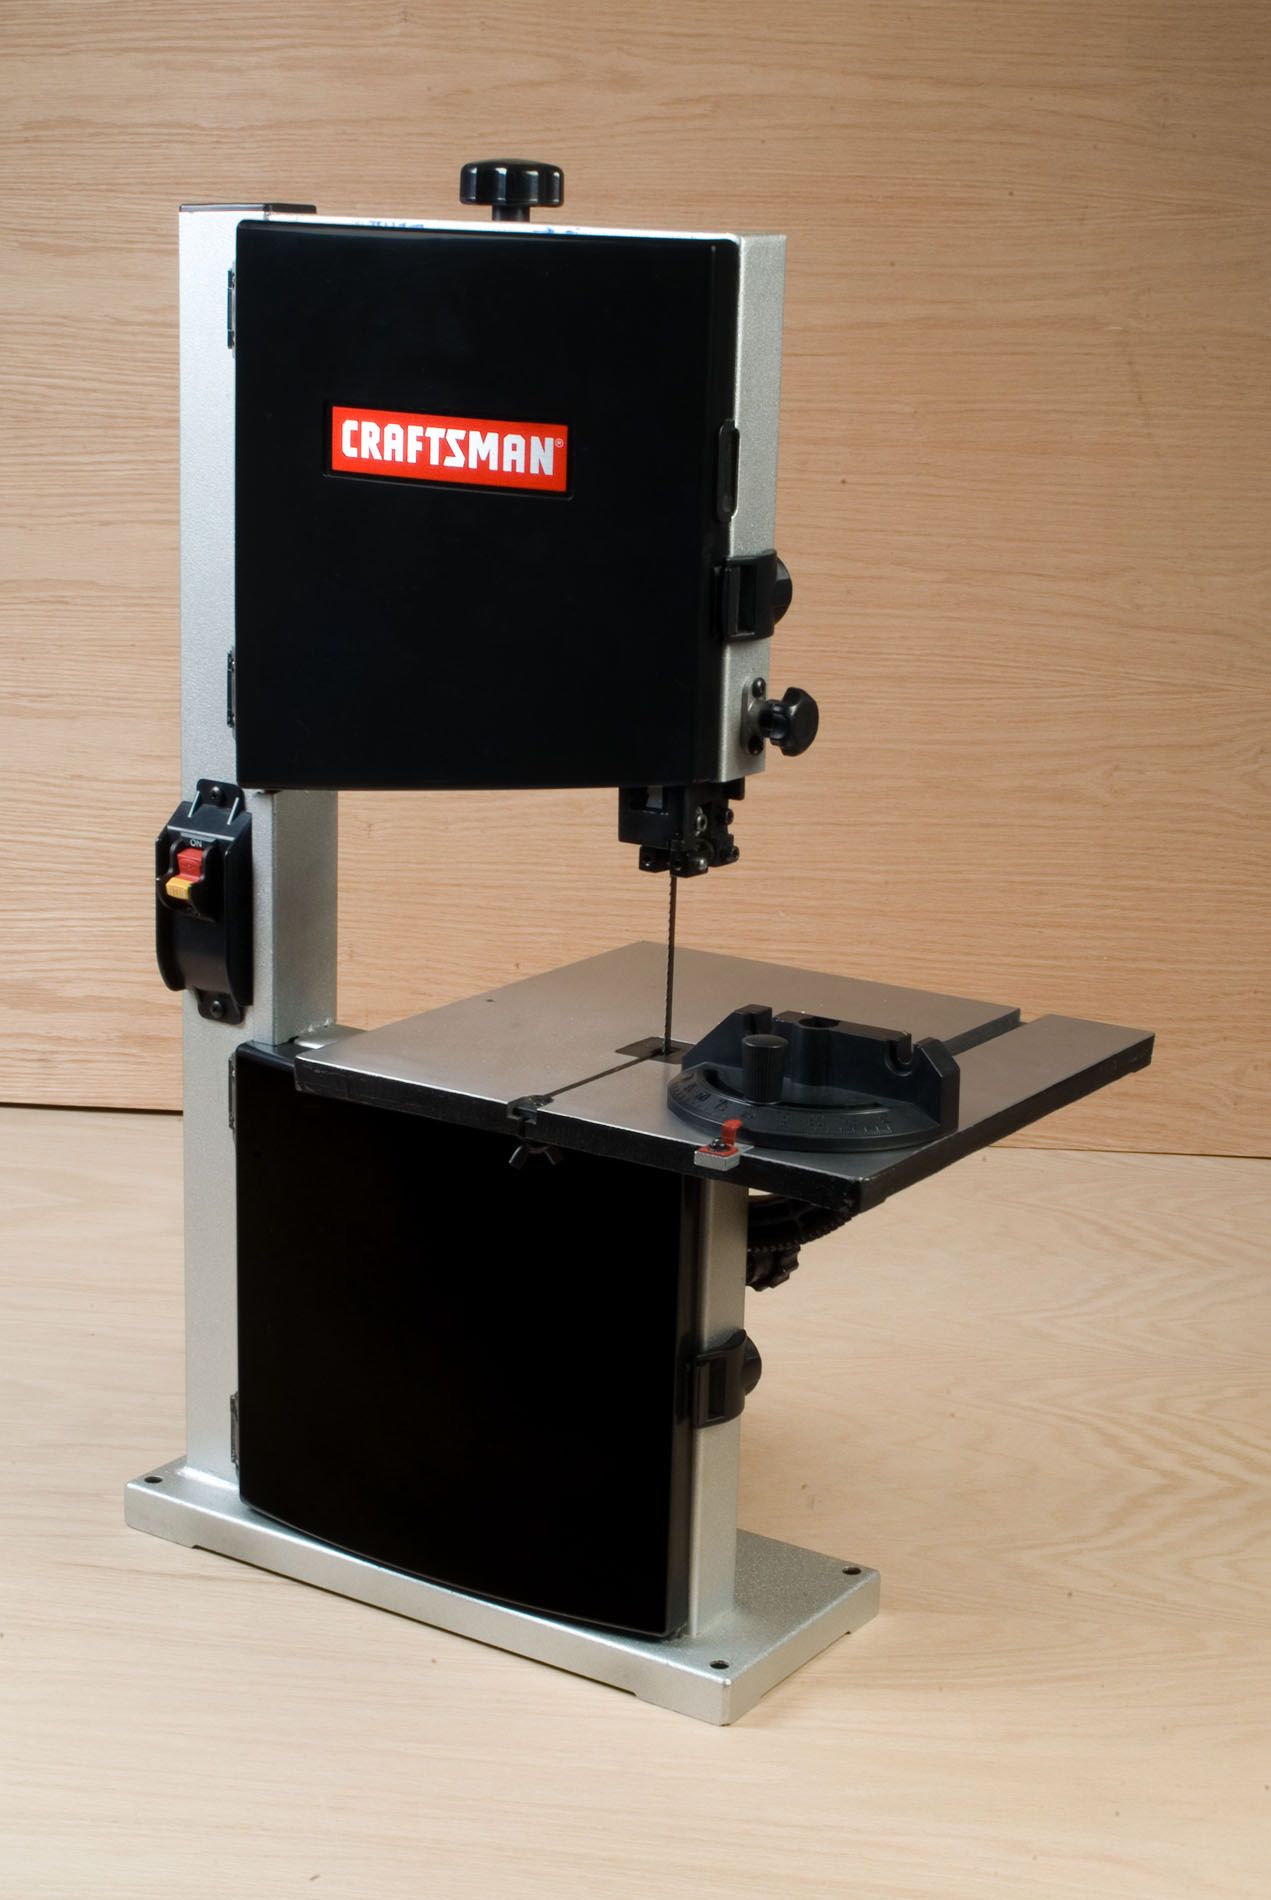 Craftsman 2.5 amp 9" Band Saw (21419) | Shop Your Way: Online Shopping